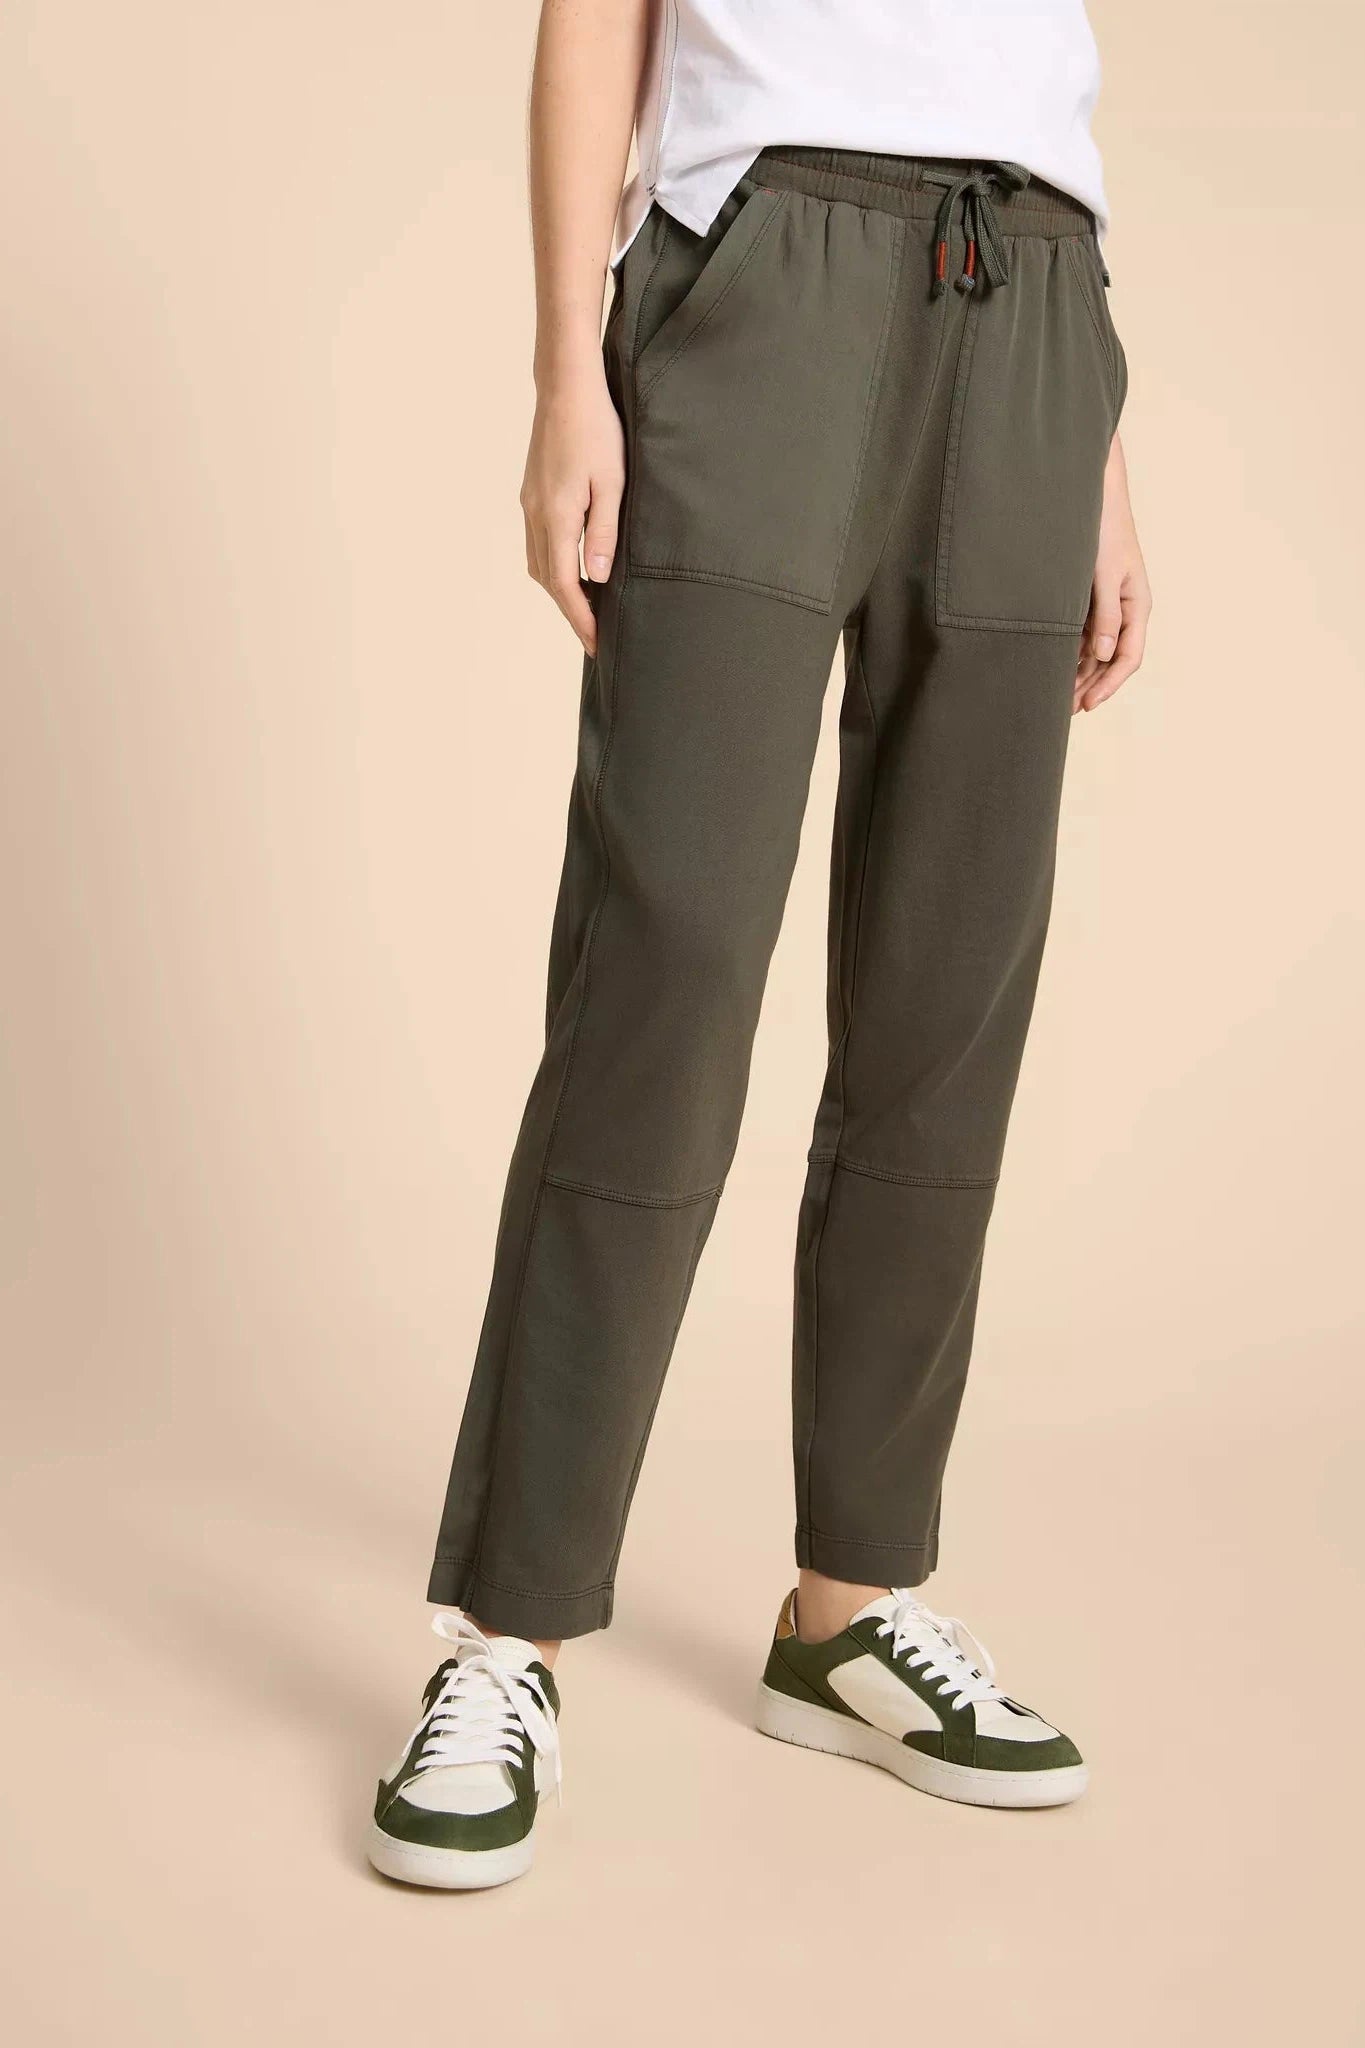 White Stuff Ava Jersey Jogger in Khaki Green-Womens-Ohh! By Gum - Shop Sustainable